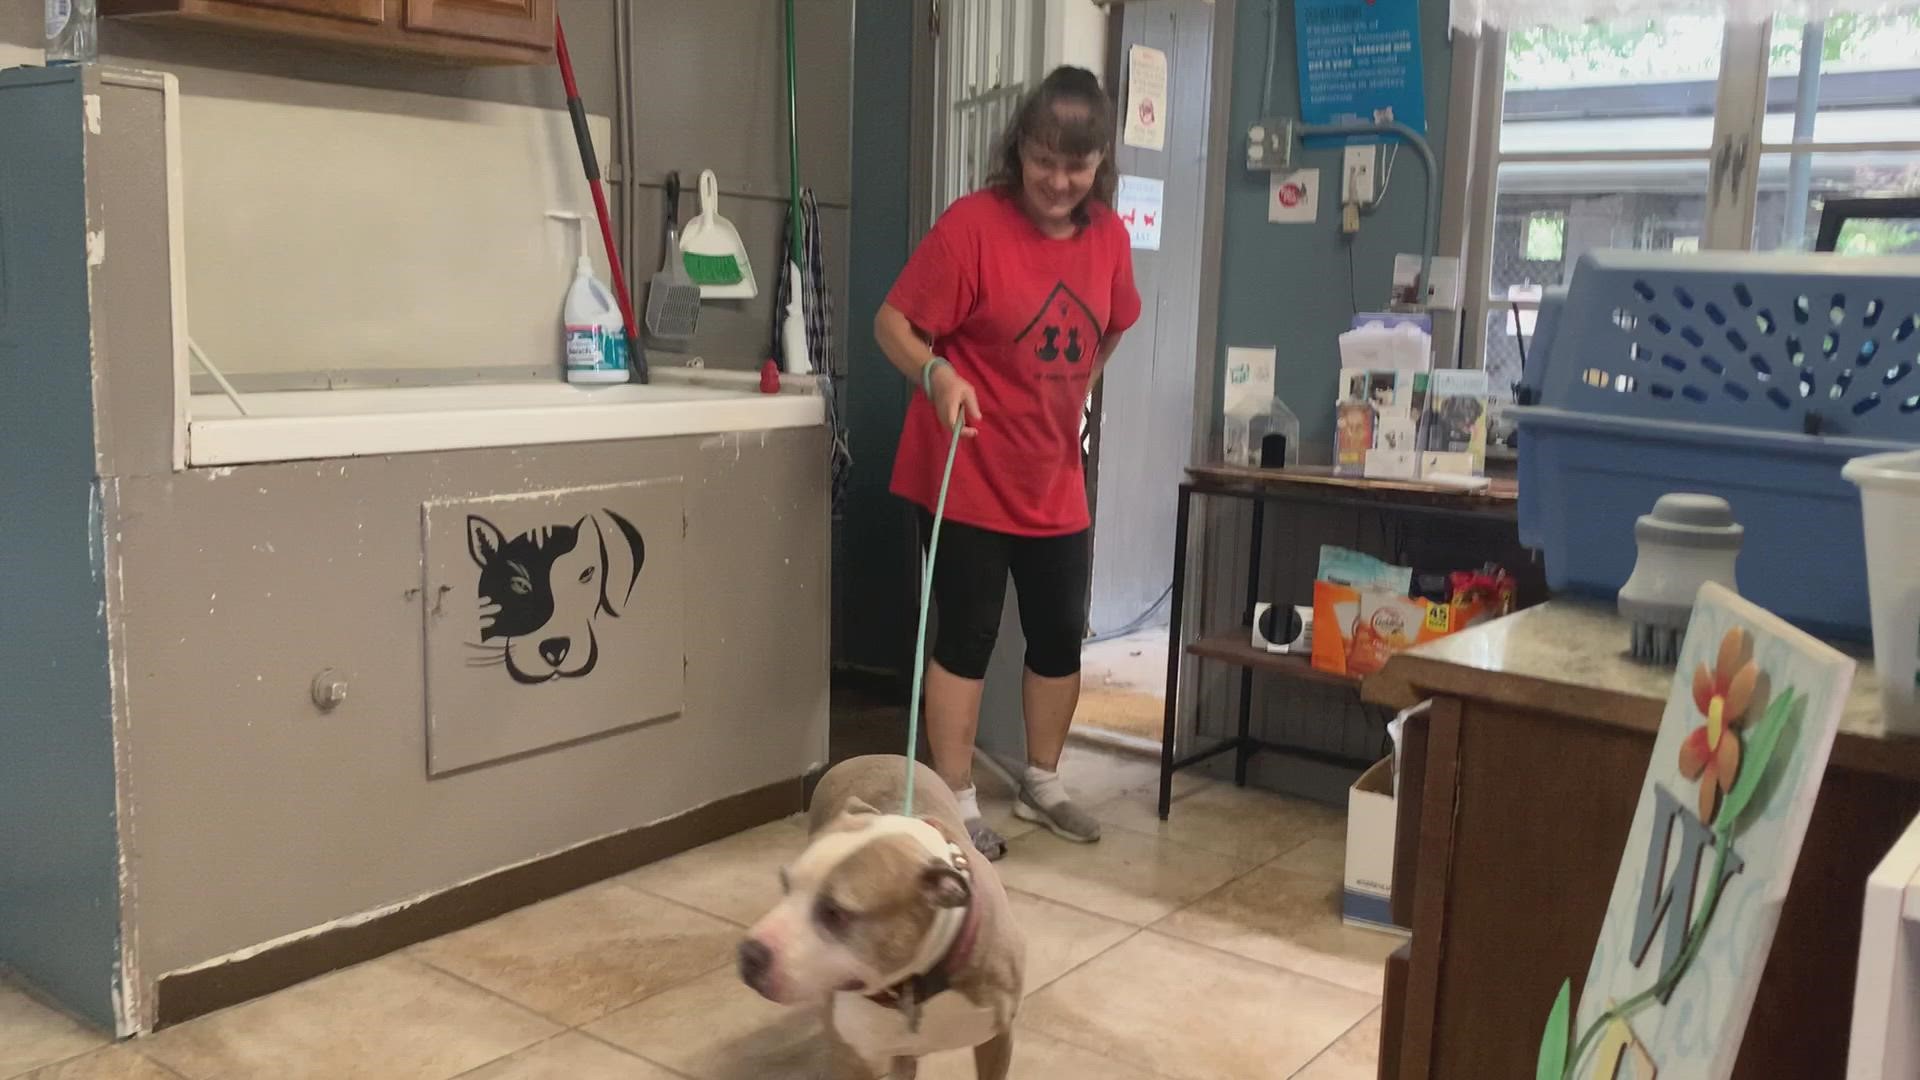 Pit Bulls have gotten a bad rap, but this one who was more than likely raised to be a bait dog has forgiven humans in spite of that and eagerly awaits a loving home.